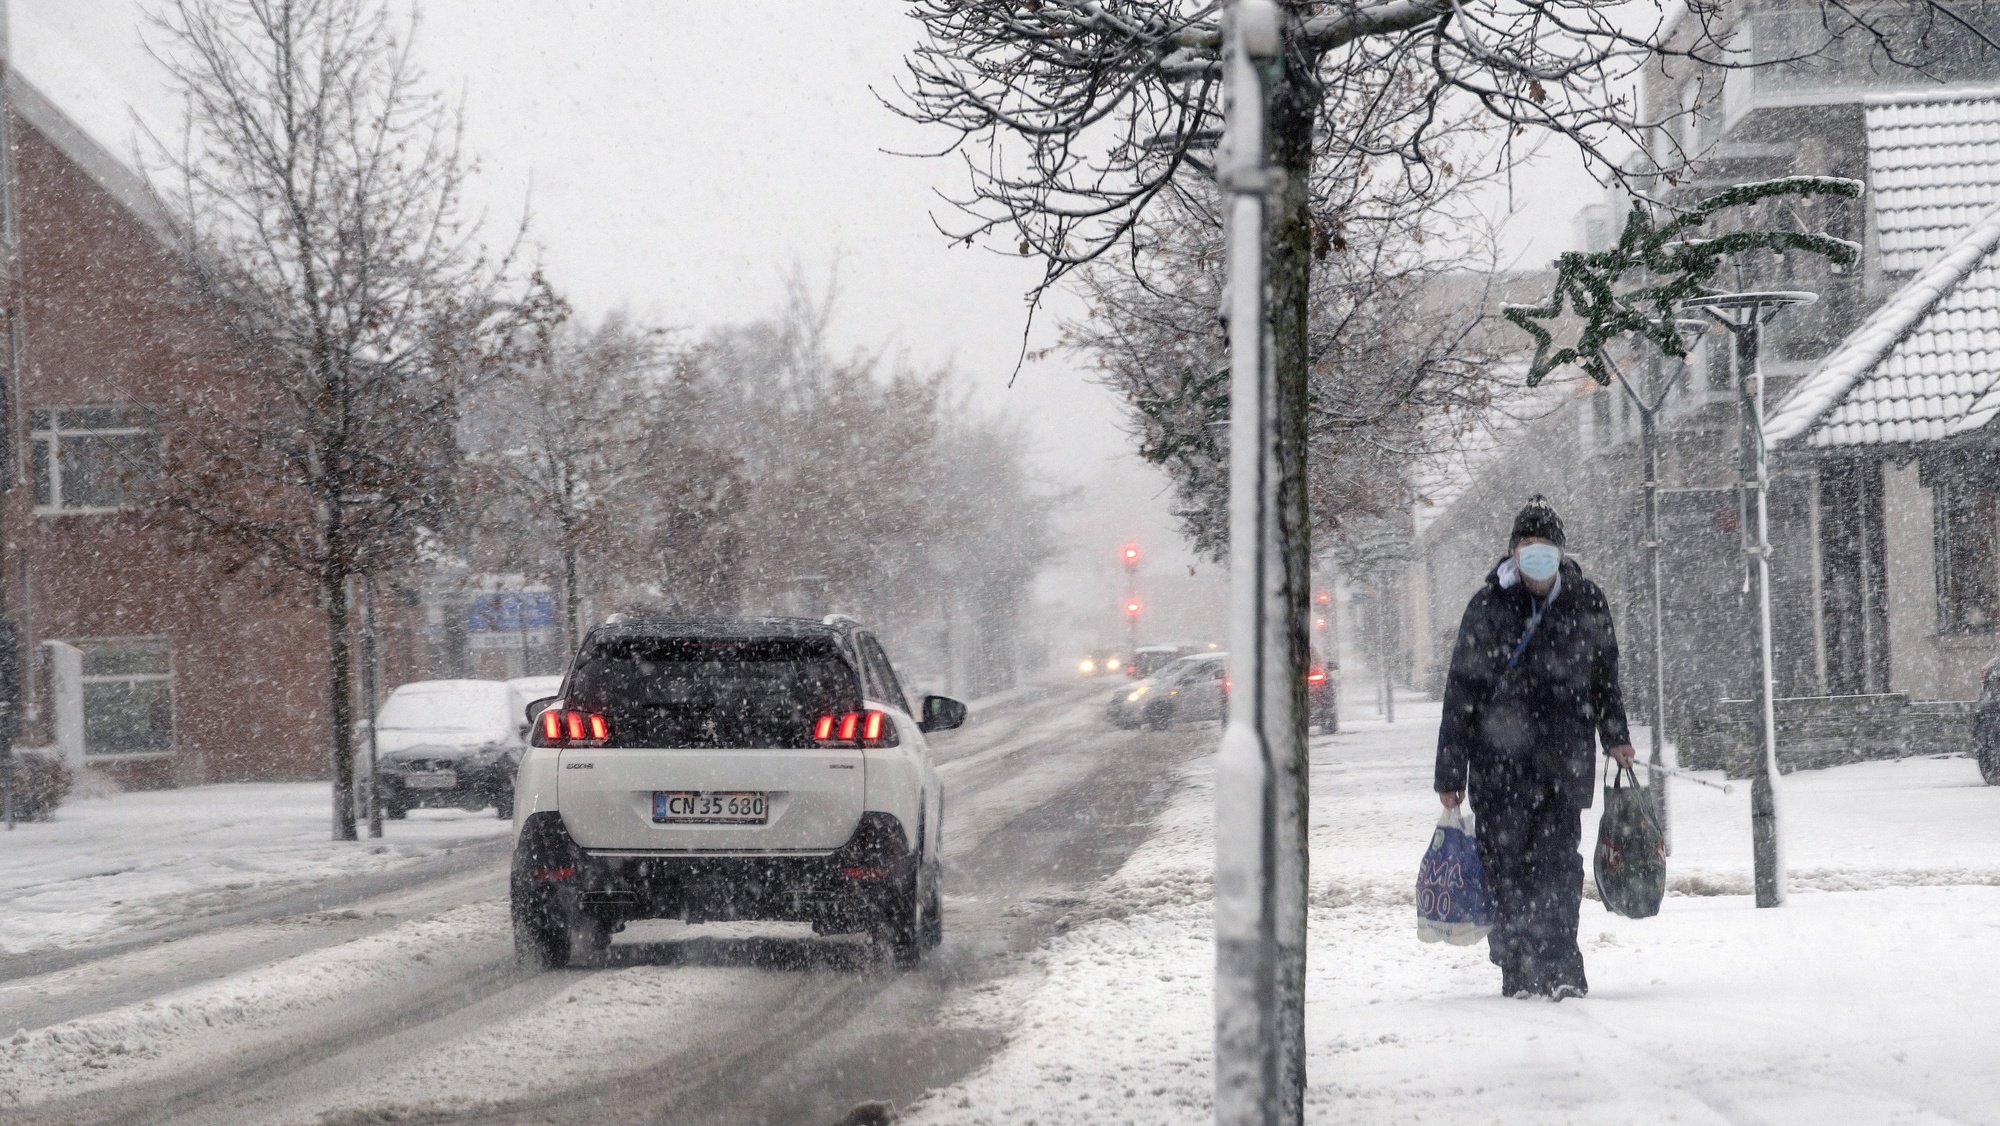 epa09614713 Snow falls in Stoevring in Northern Jutland, Denmark, 01 December 2021. According to meteorological authorities, severe winter weather is affecting parts of Denmark with rain and snow fall and temperatures around three degrees Celsius.  EPA/BO AMSTRUP  DENMARK OUT